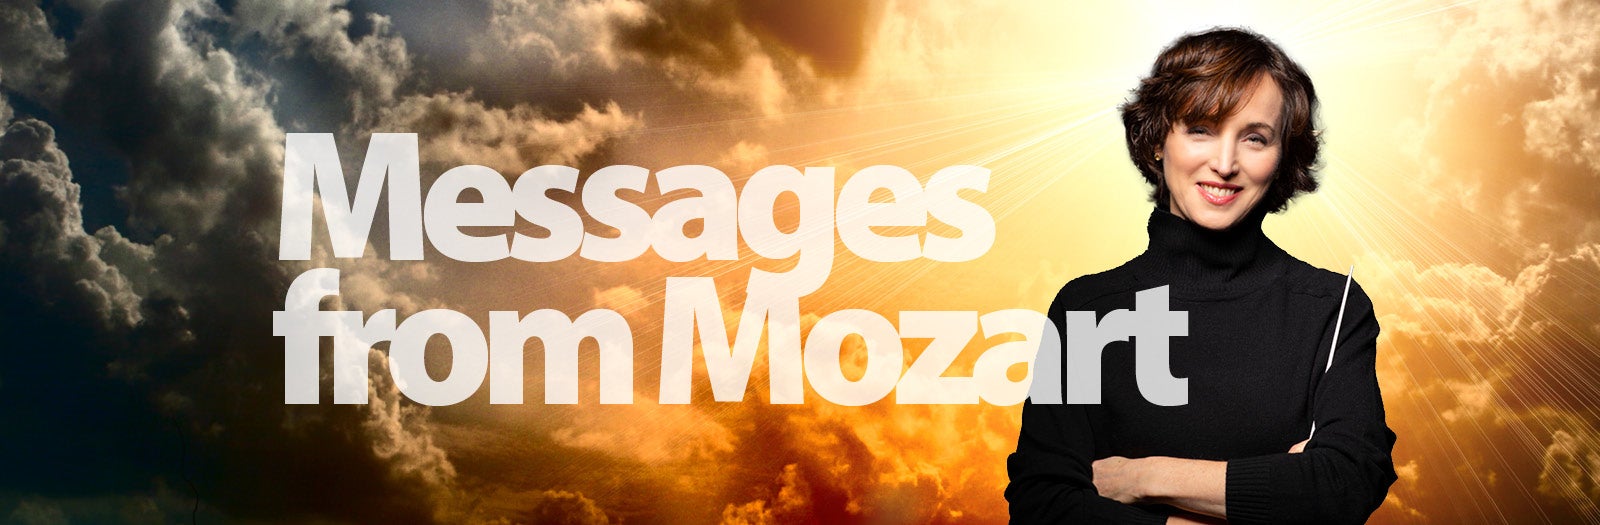 MESSAGES FROM MOZART